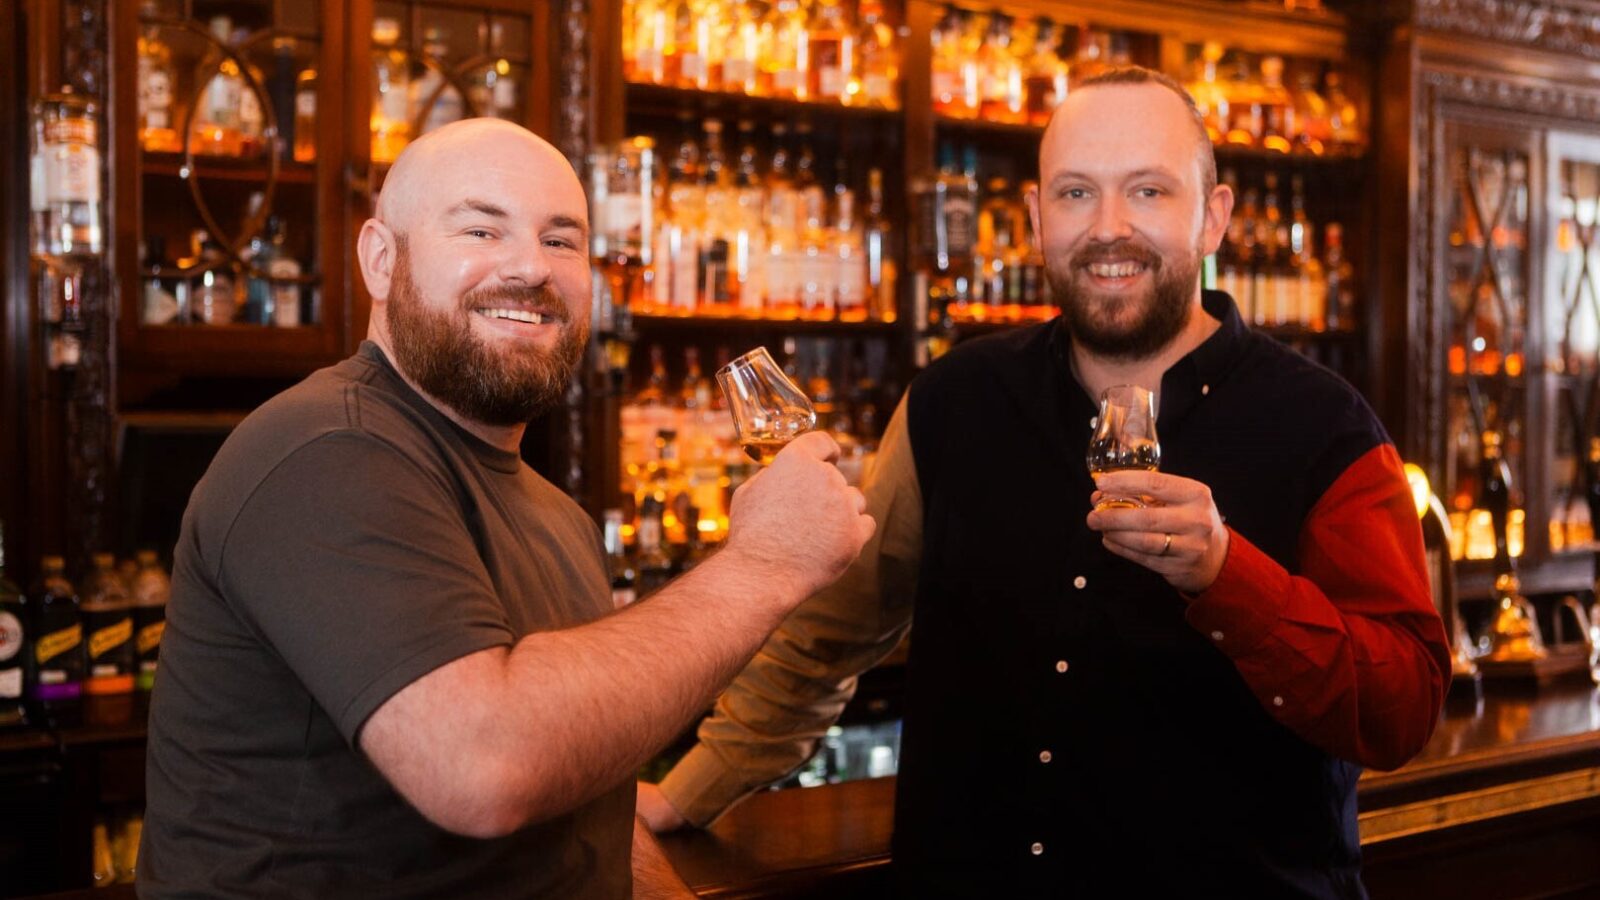 Raise a dram to Whisky Week this September